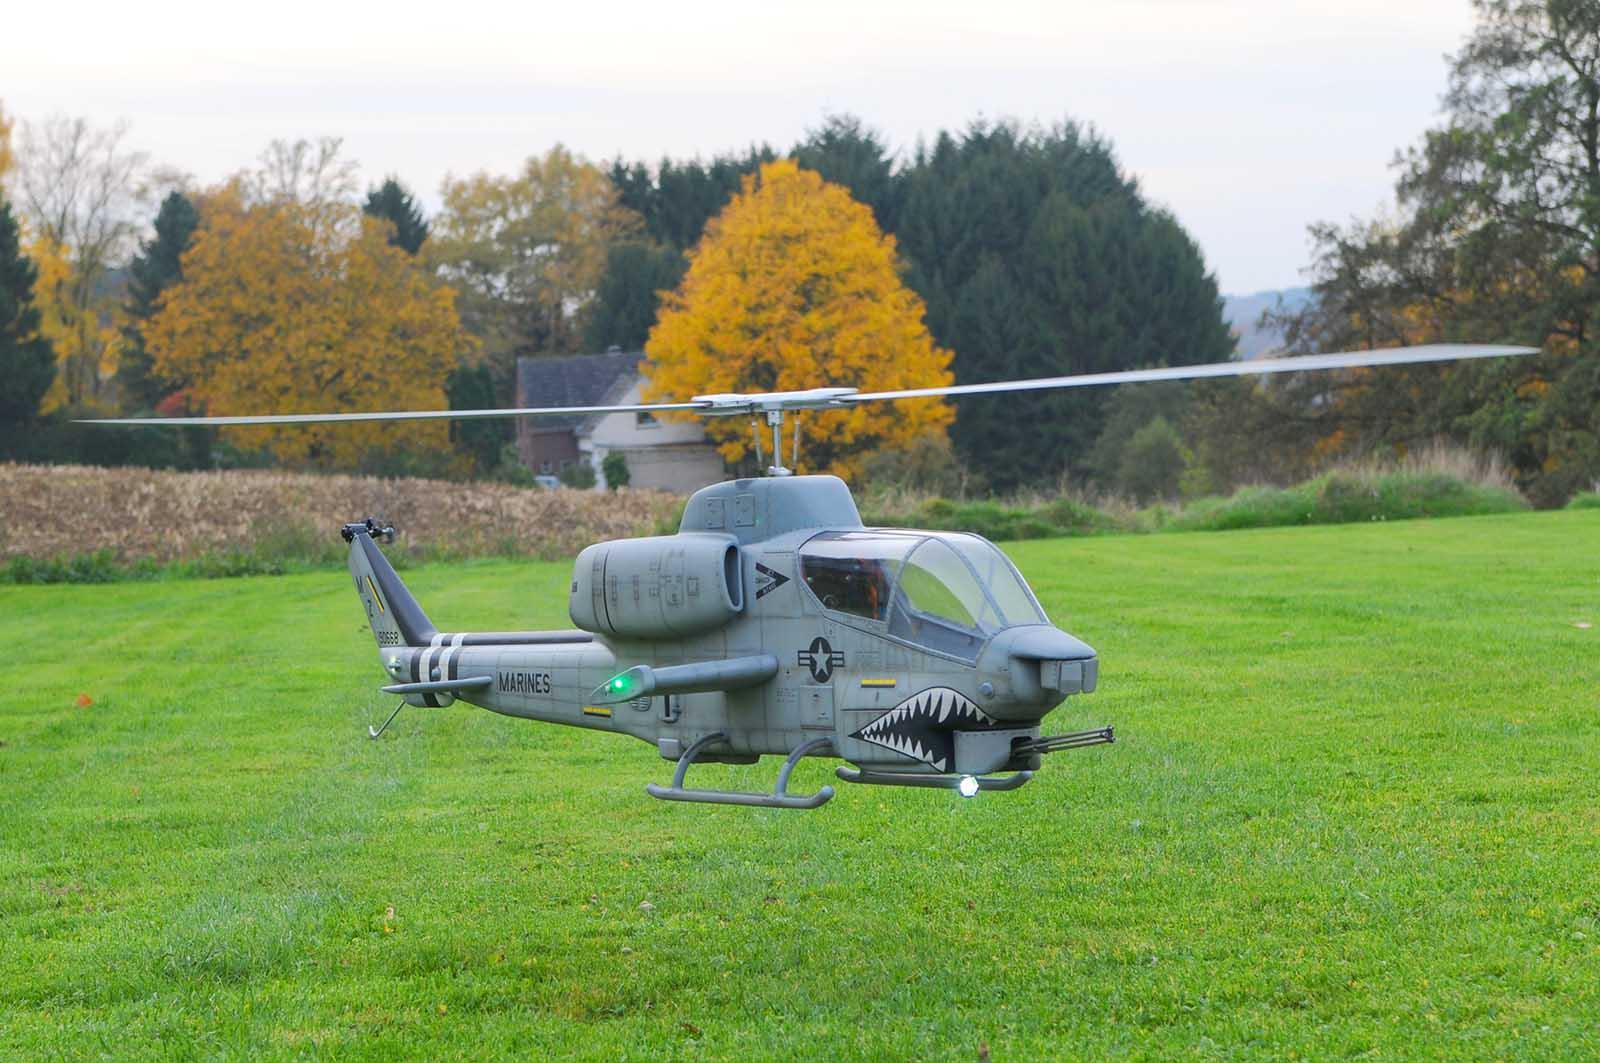 Ah 1 Cobra Rc Helicopter: Popular Models of the AH-1 Cobra RC Helicopter